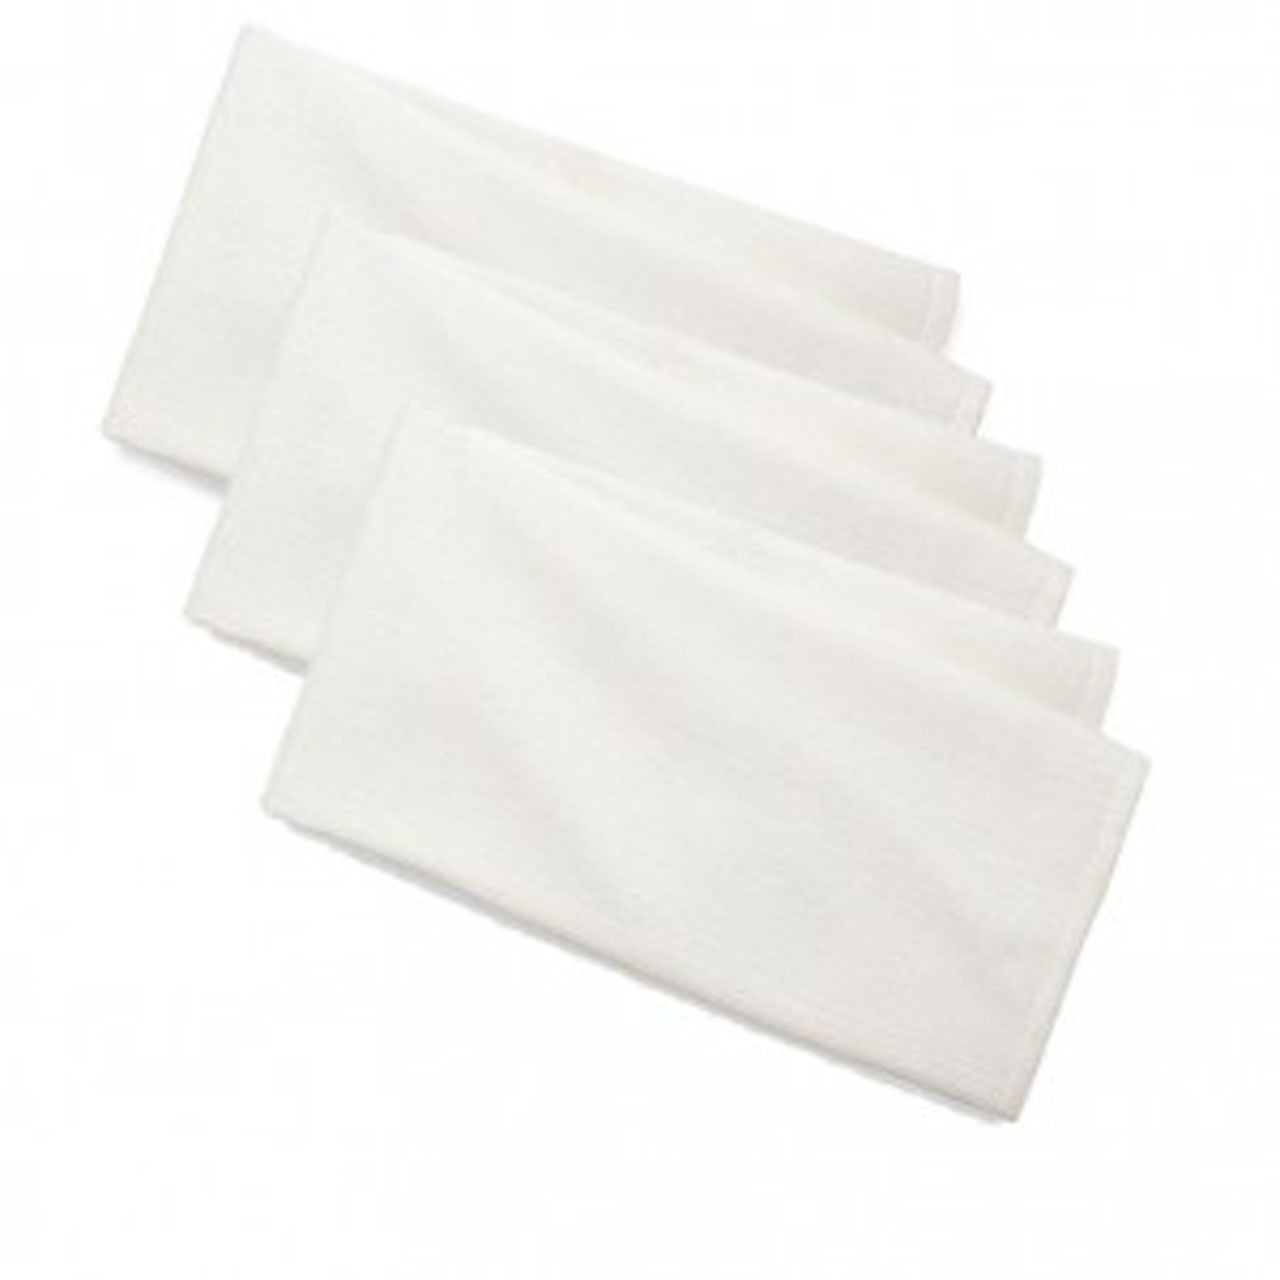 What benefits do huck towels provide as wholesale towels?